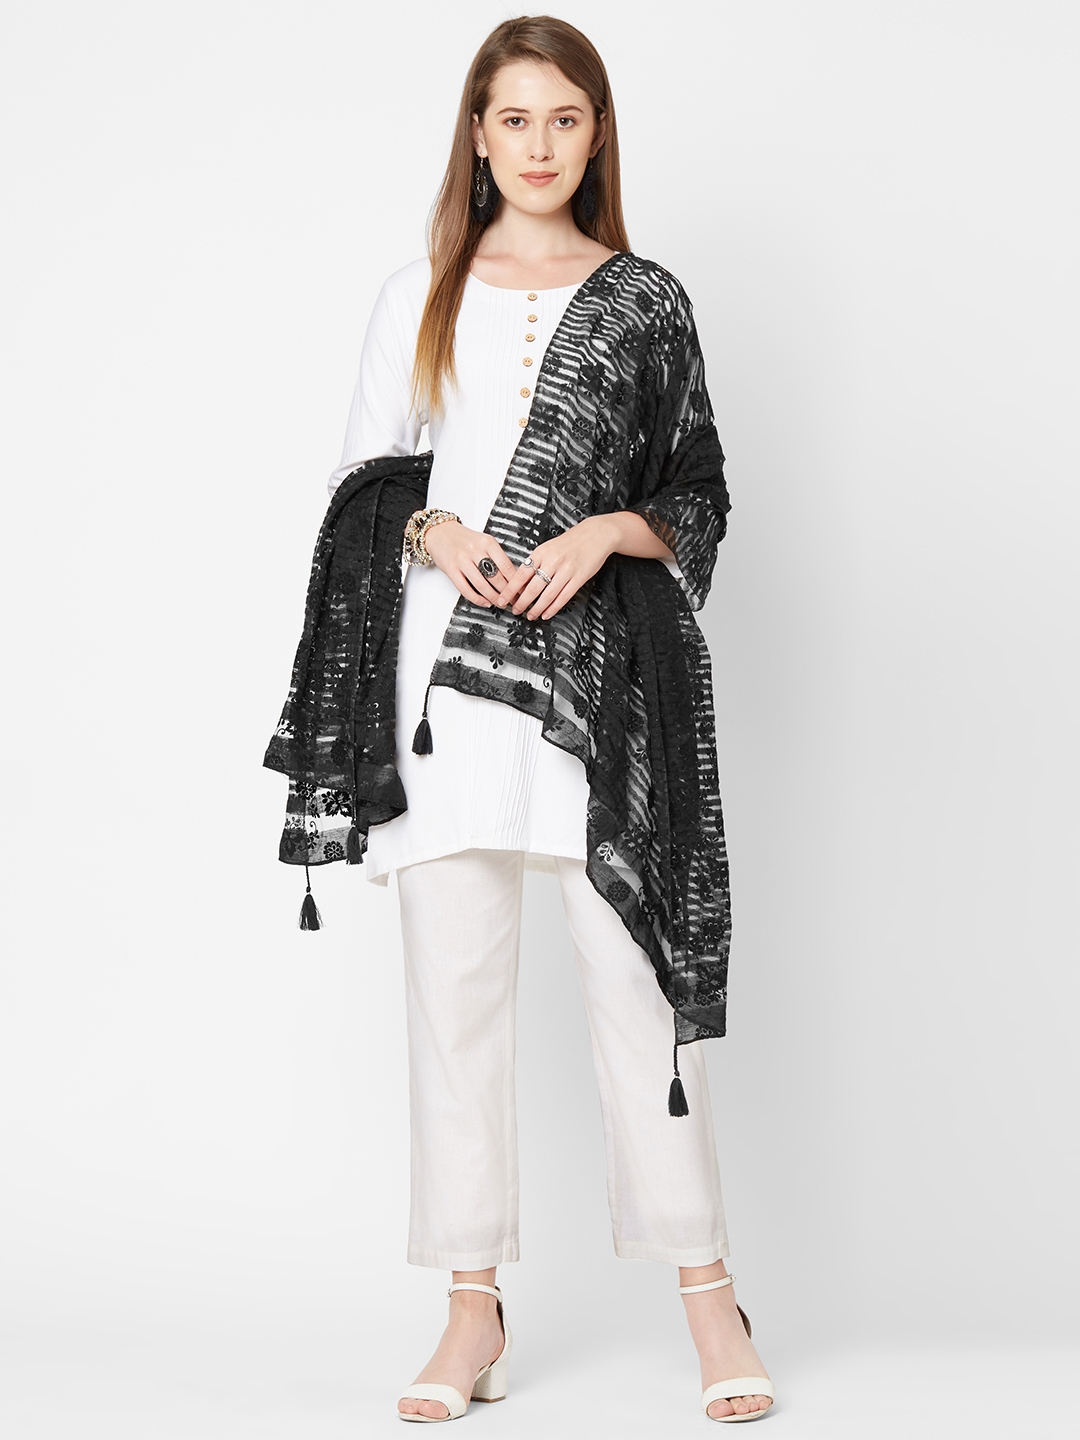 Get Wrapped | Get Wrapped Black Flock Printed Dupatta with Tassels for Women